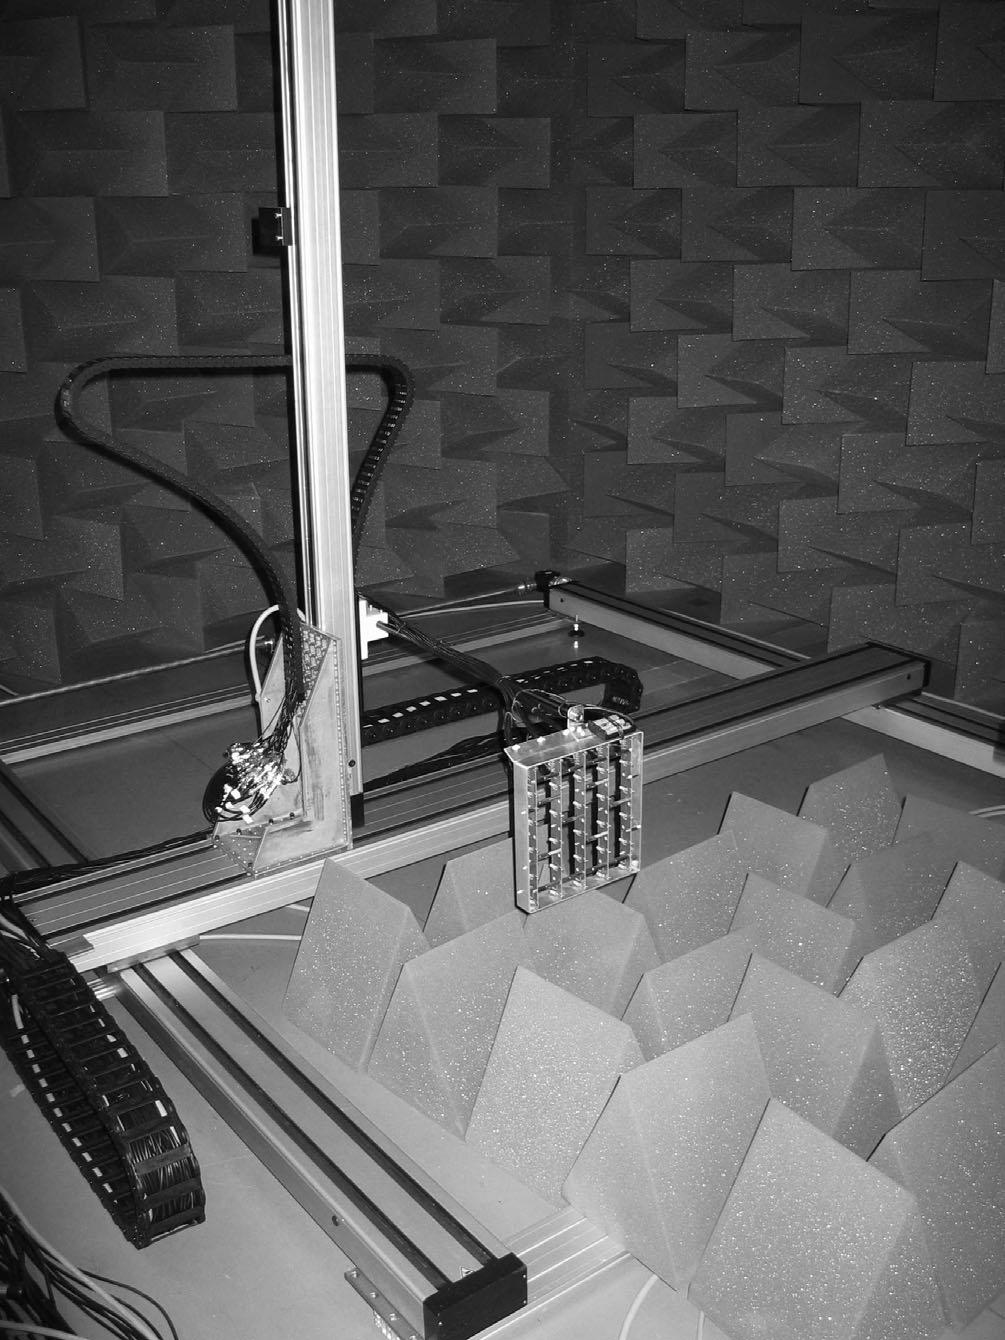 response on the acoustical axis was measured. Next, the loudspeaker was rotated and its response measured again. The measurements were performed using B&K 4954 free-field microphone.